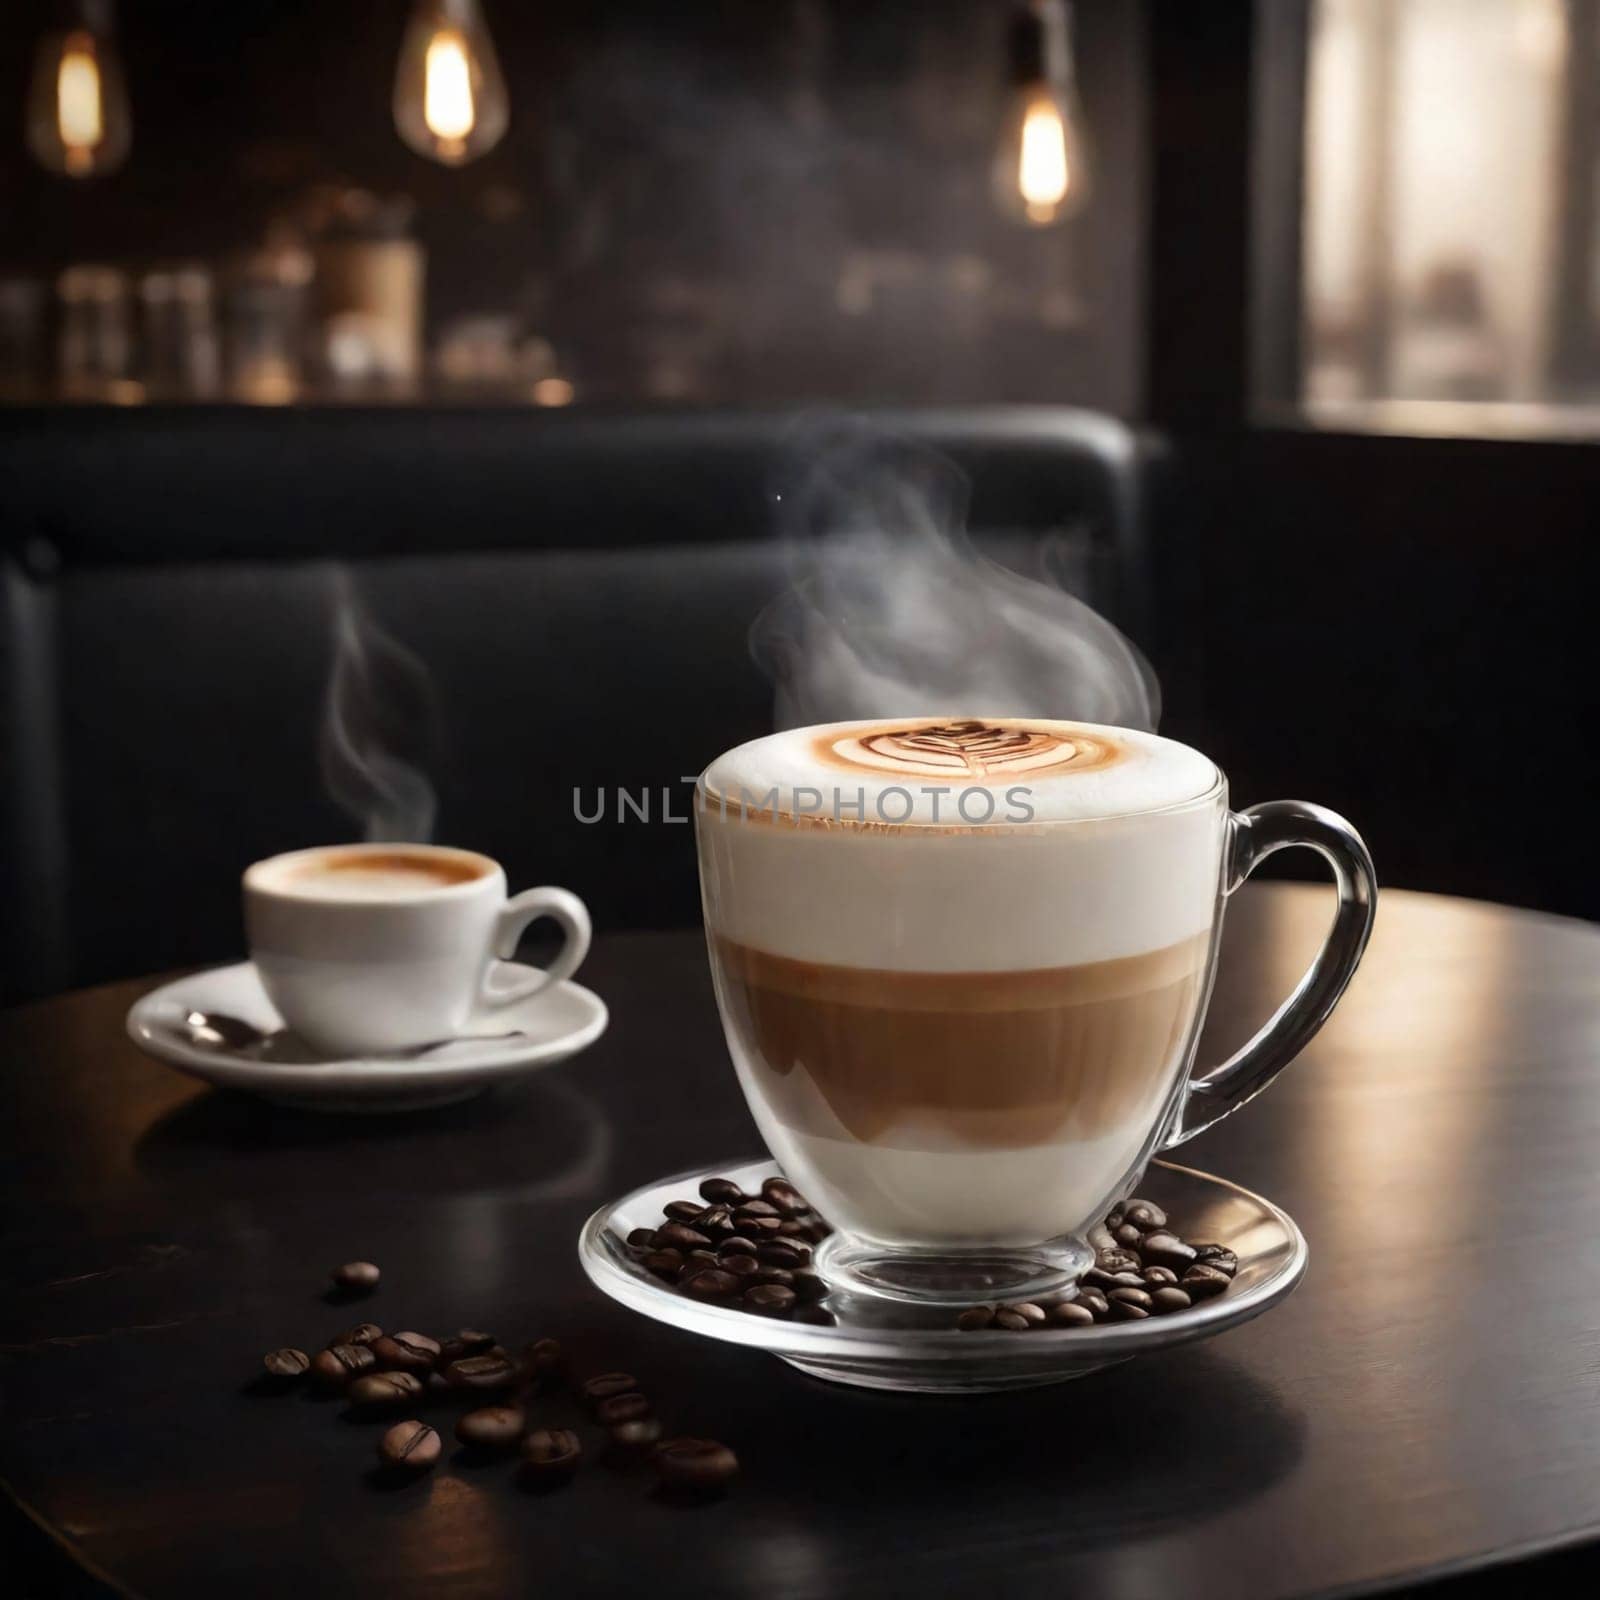 A cup of hot cappuccino made of transparent glass with visible layers of coffee, milk, foam and coffee beans by Севостьянов